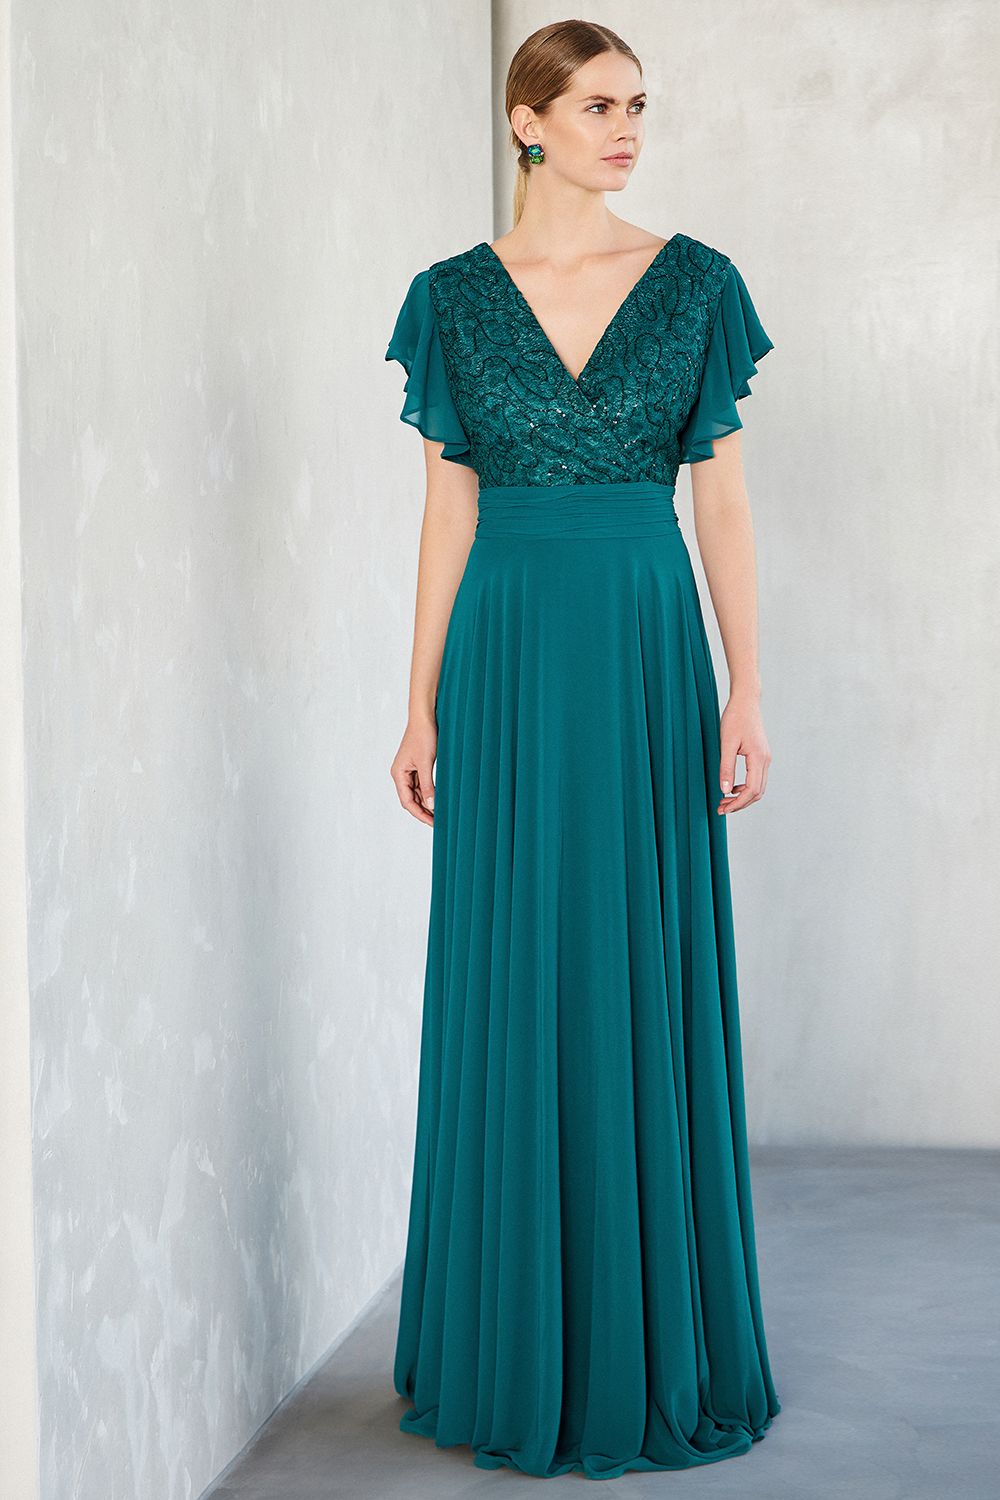 Classic Dresses / Long evening chiffon dress with lace and beading at the top